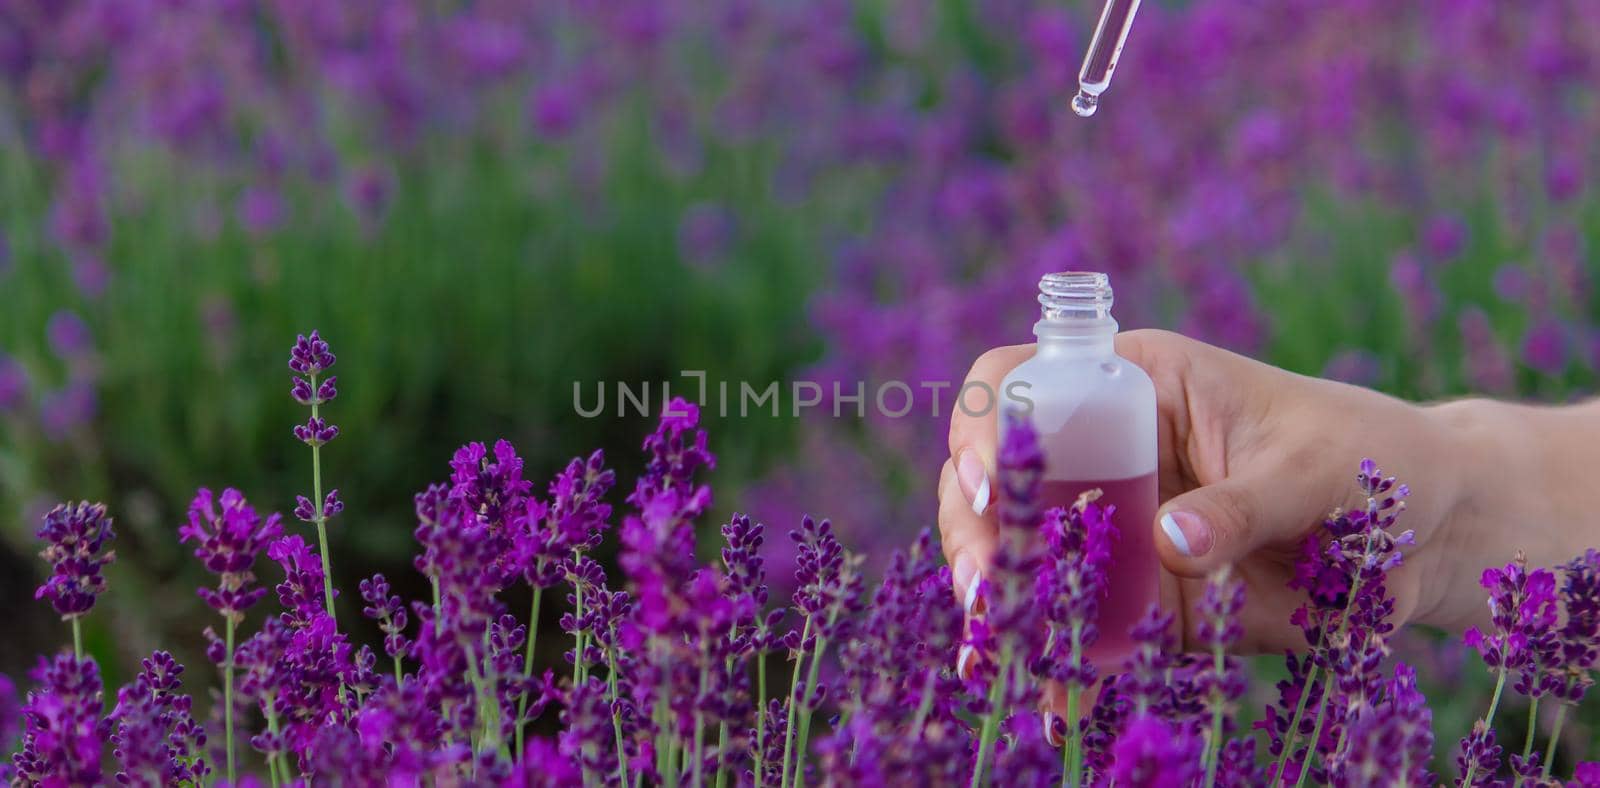 A bottle of lavender essential oil on a wooden table and a field of flowers background. selective focus